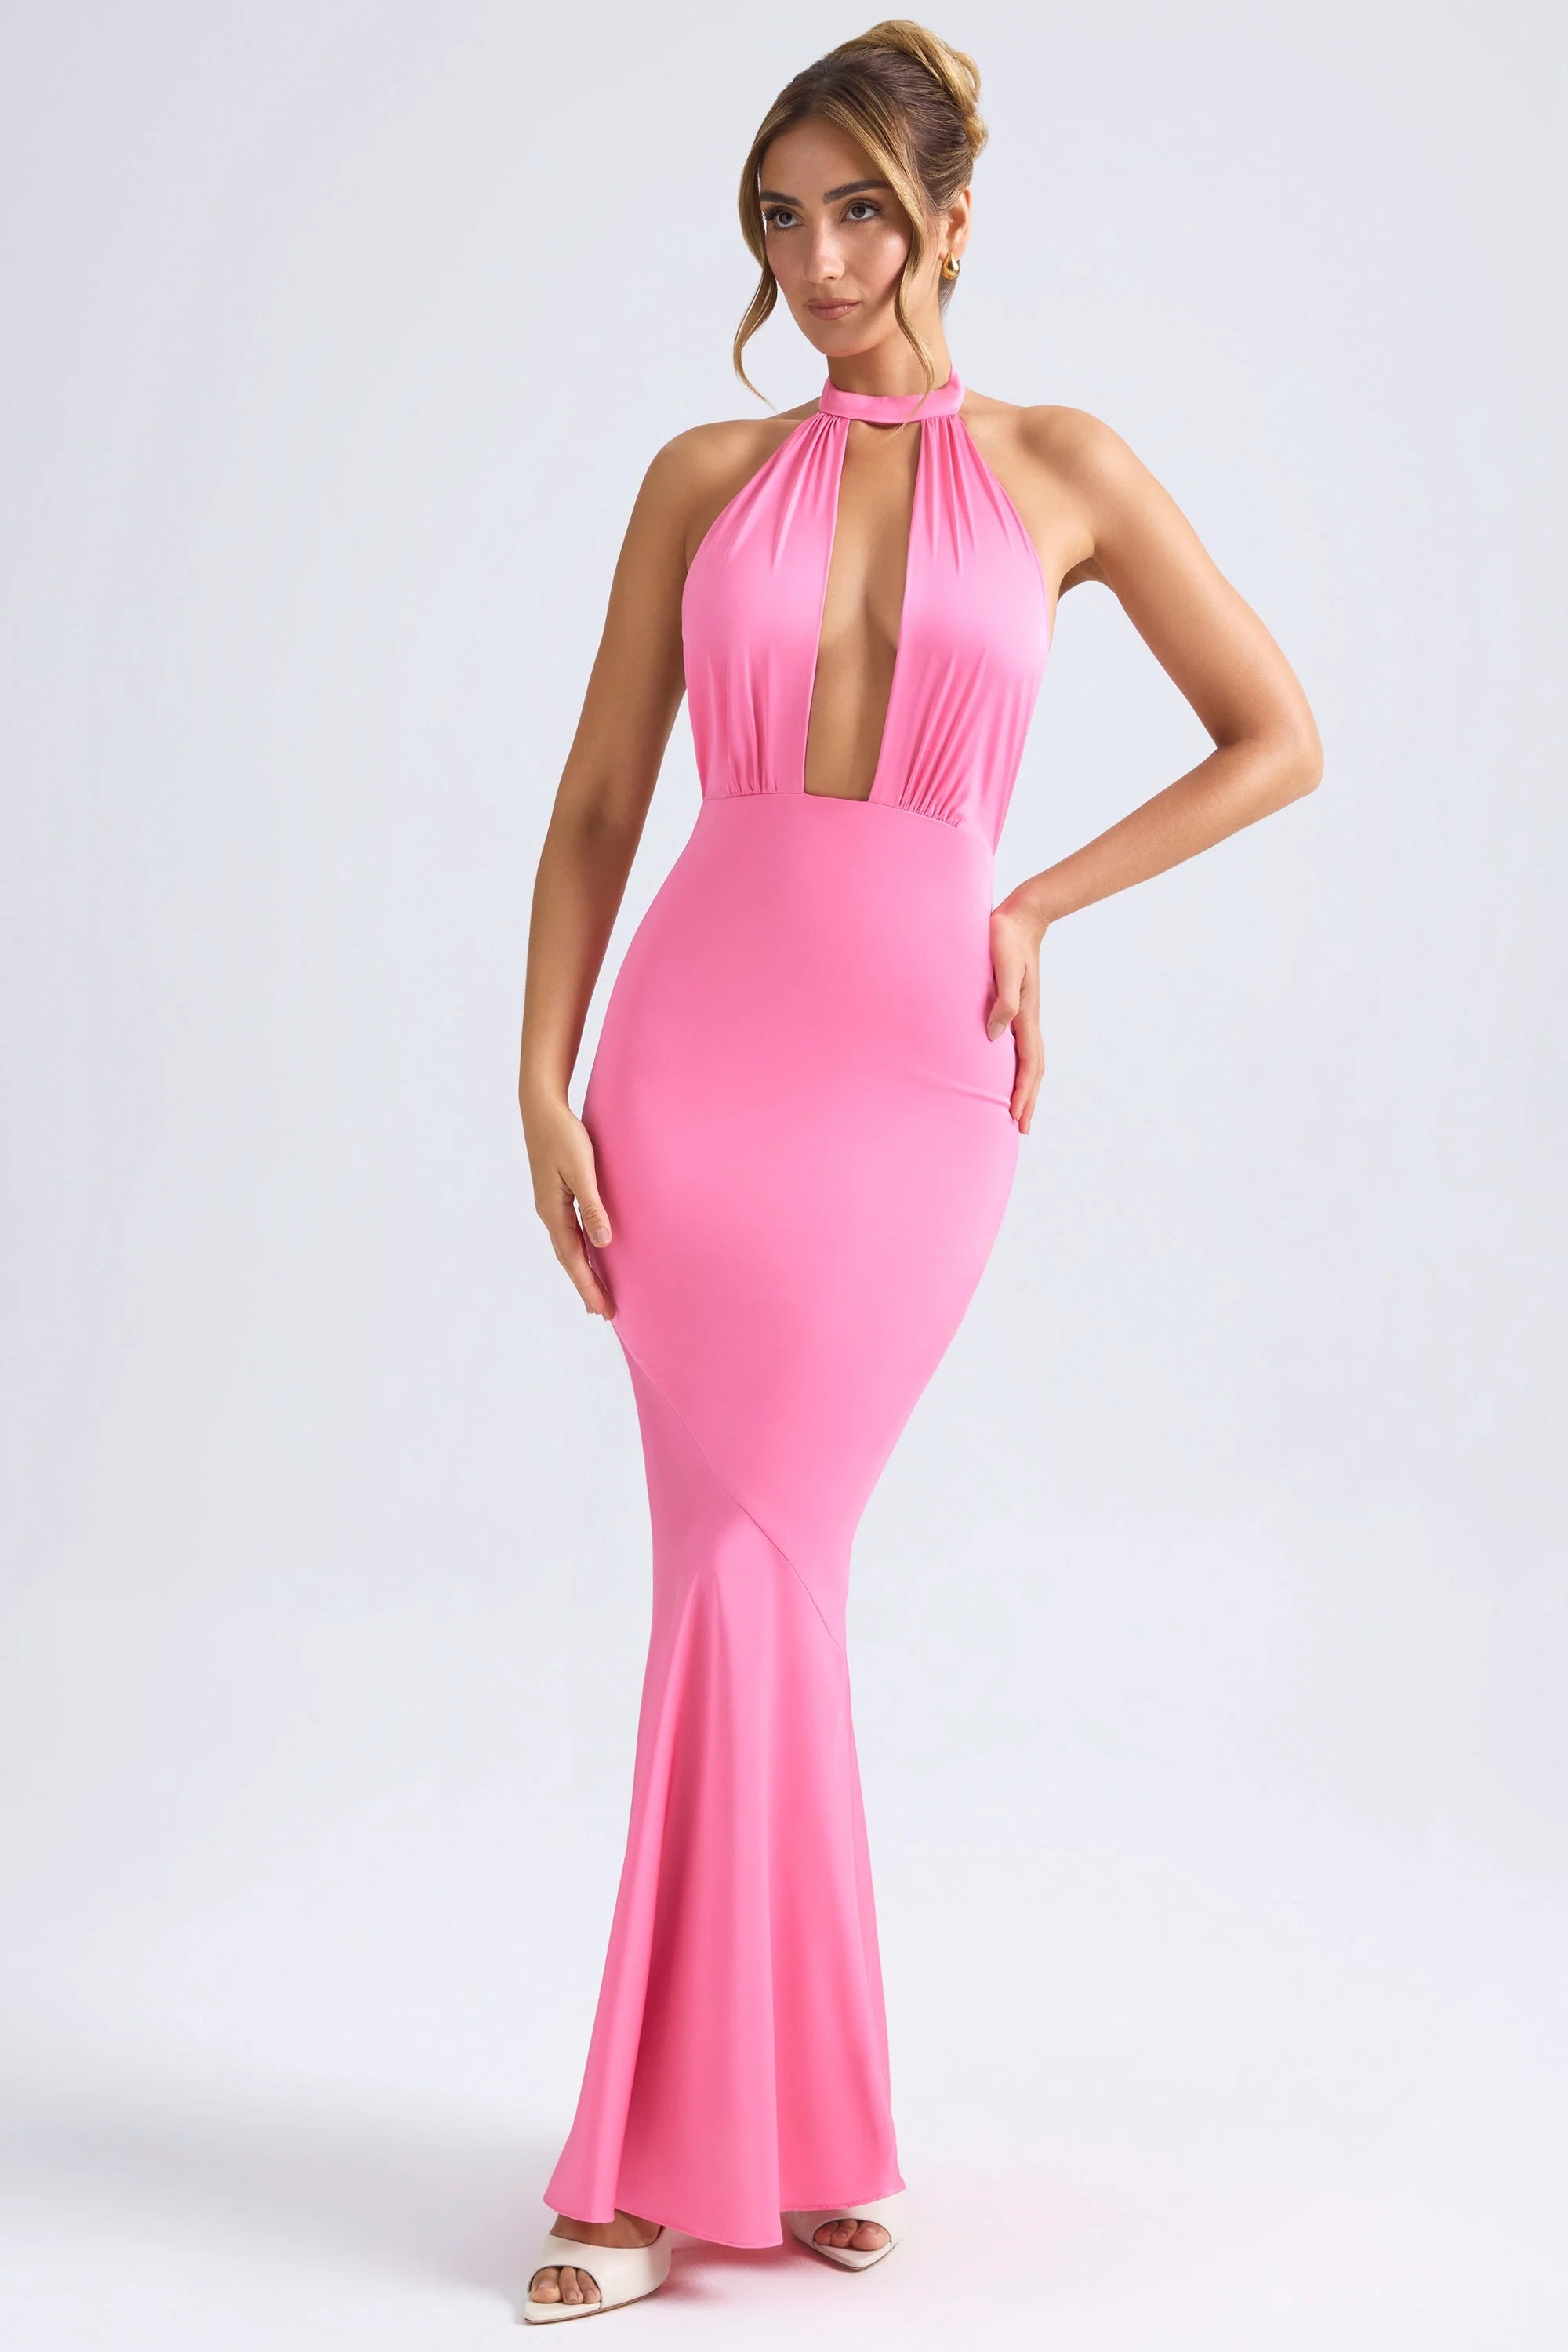 Halterneck Fishtail Gown in Hot Pink